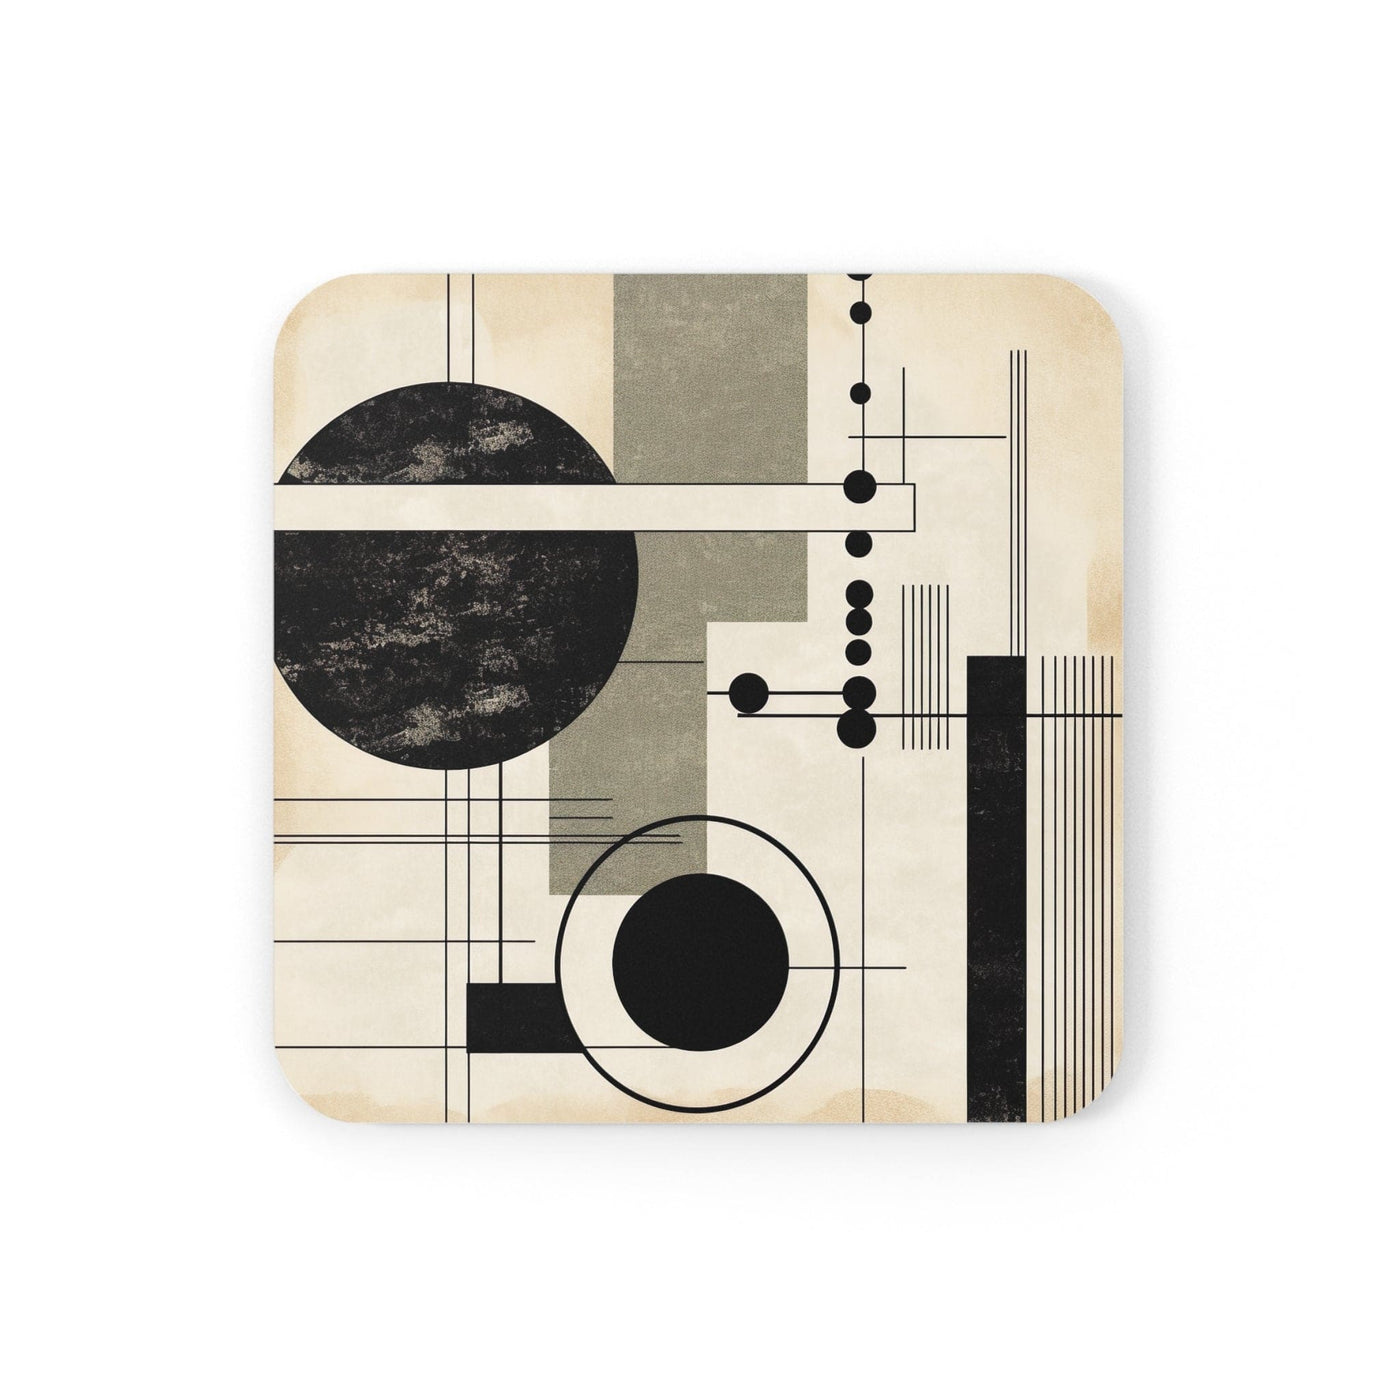 Coaster Set Of 4 For Drinks Abstract Black Beige Brown Geometric Shapes